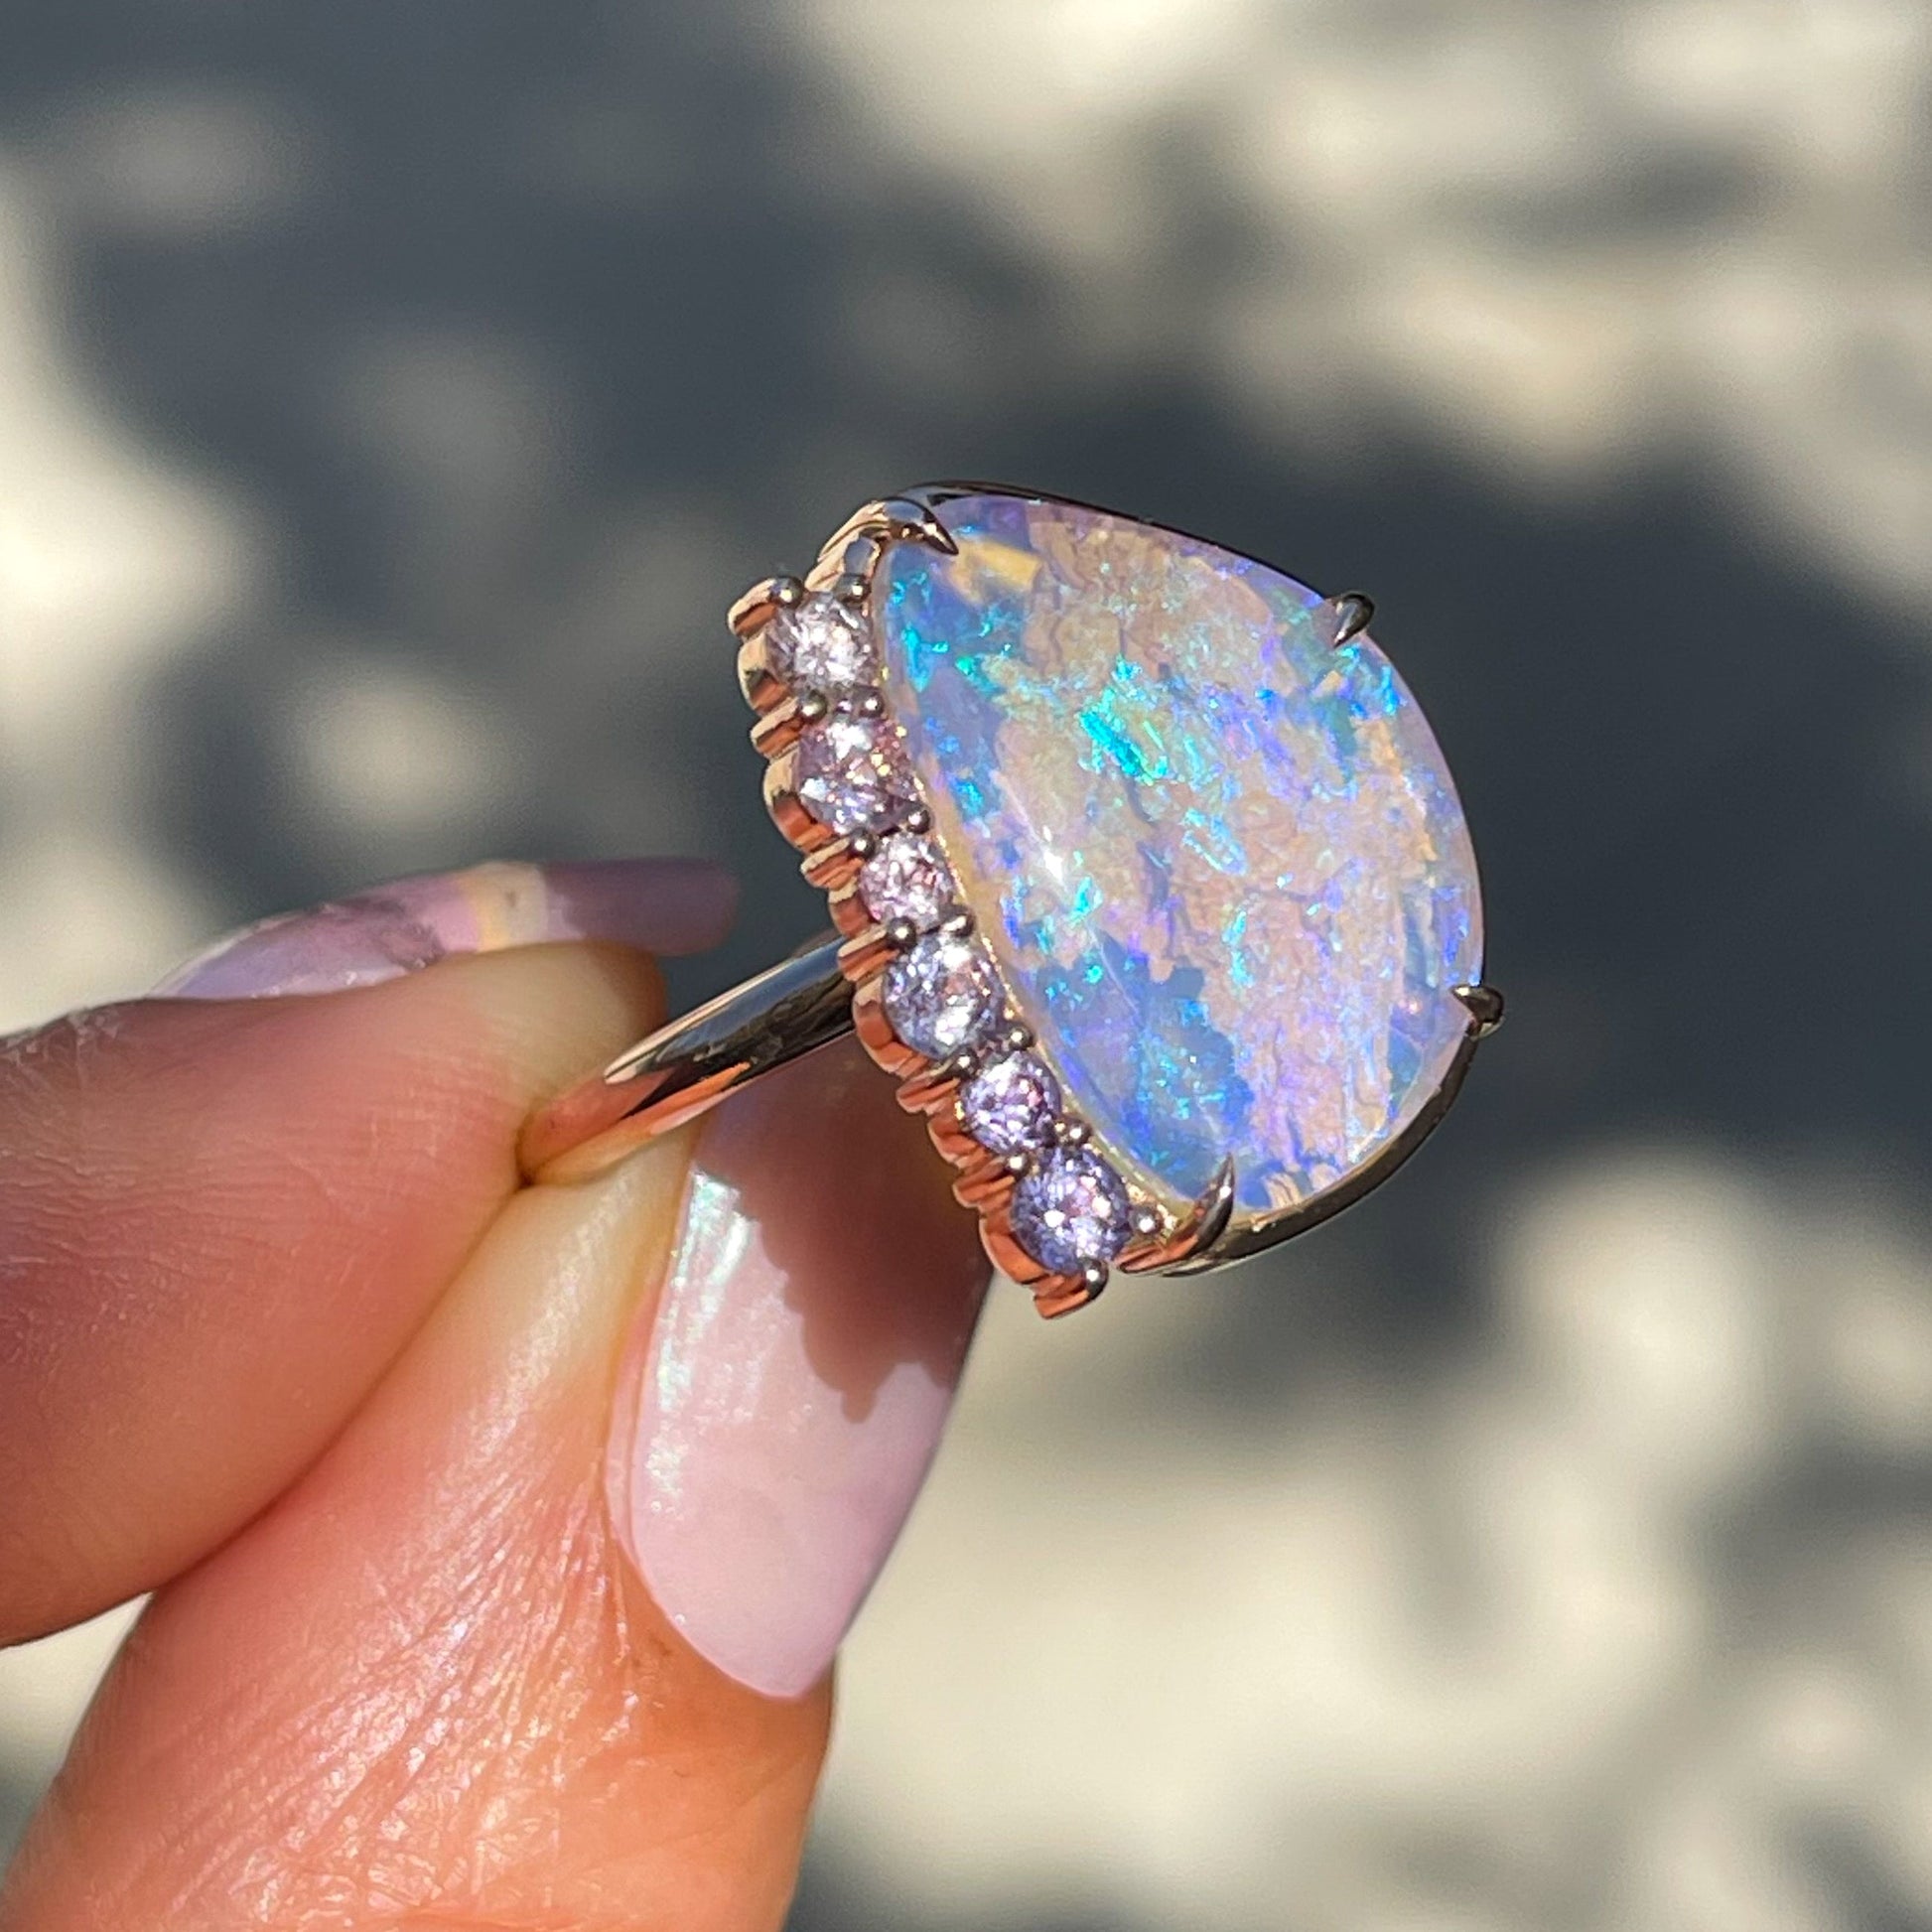 An Australian Opal Ring by NIXIN Jewelry held at an angle to show the prong setting of the sapphire frame. The purple opal flashes electric blue sparks across its facade.